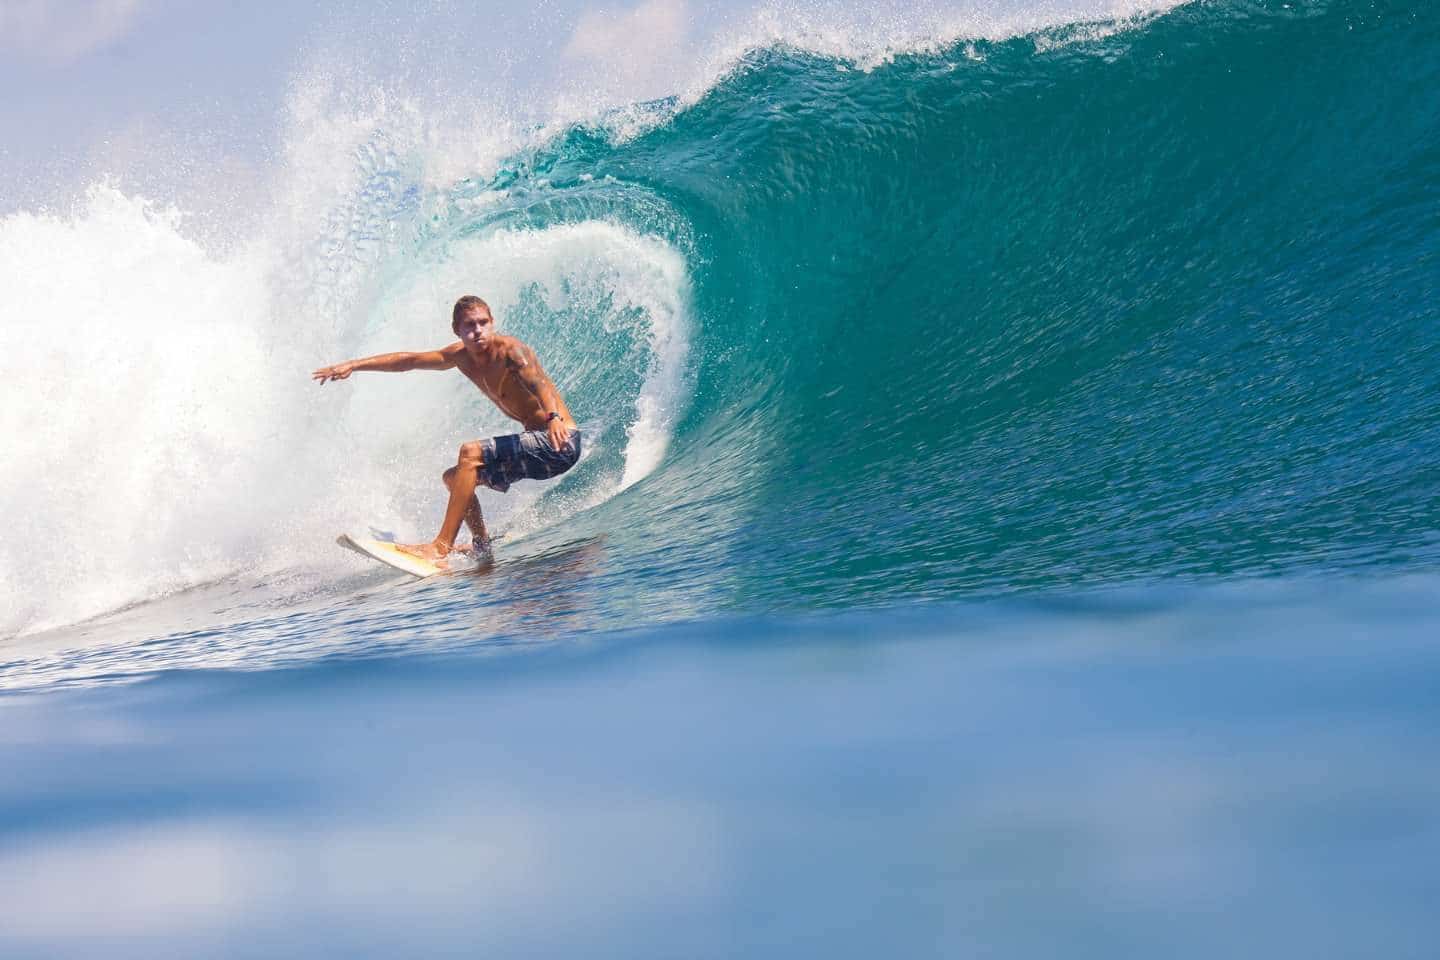 A surfer riding the waves in Lombok, Indonesia